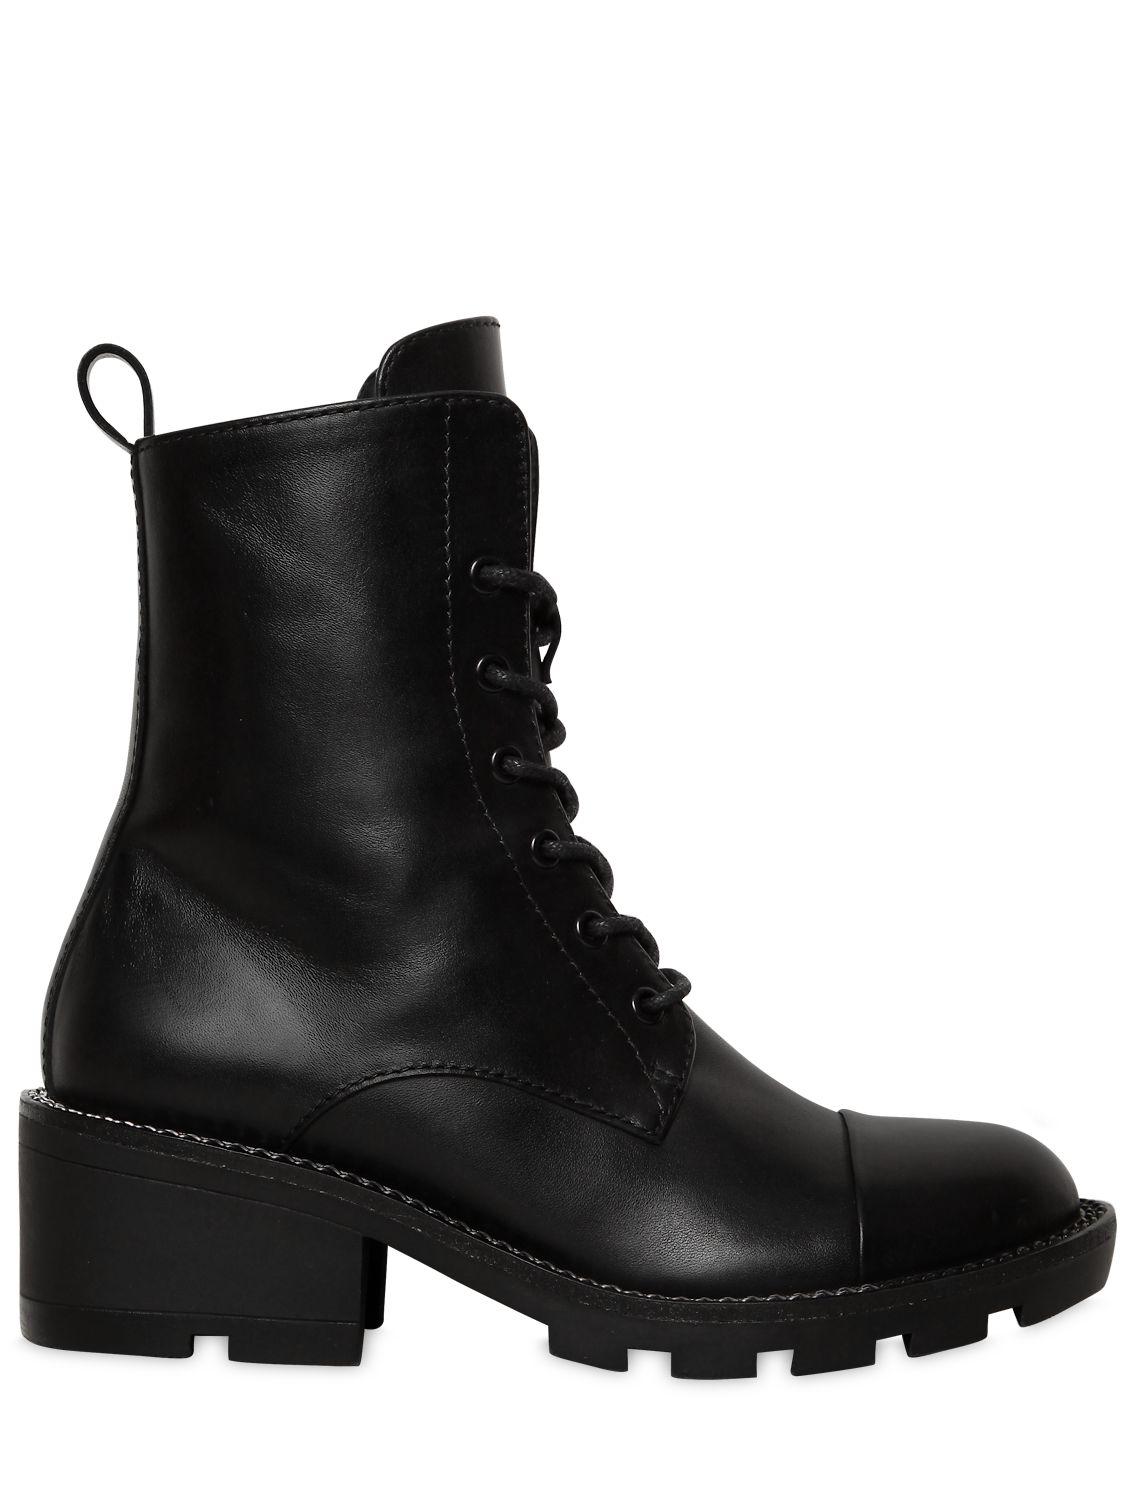 Kendall + Kylie 30mm Park Chained Leather Combat Boots in Black - Lyst